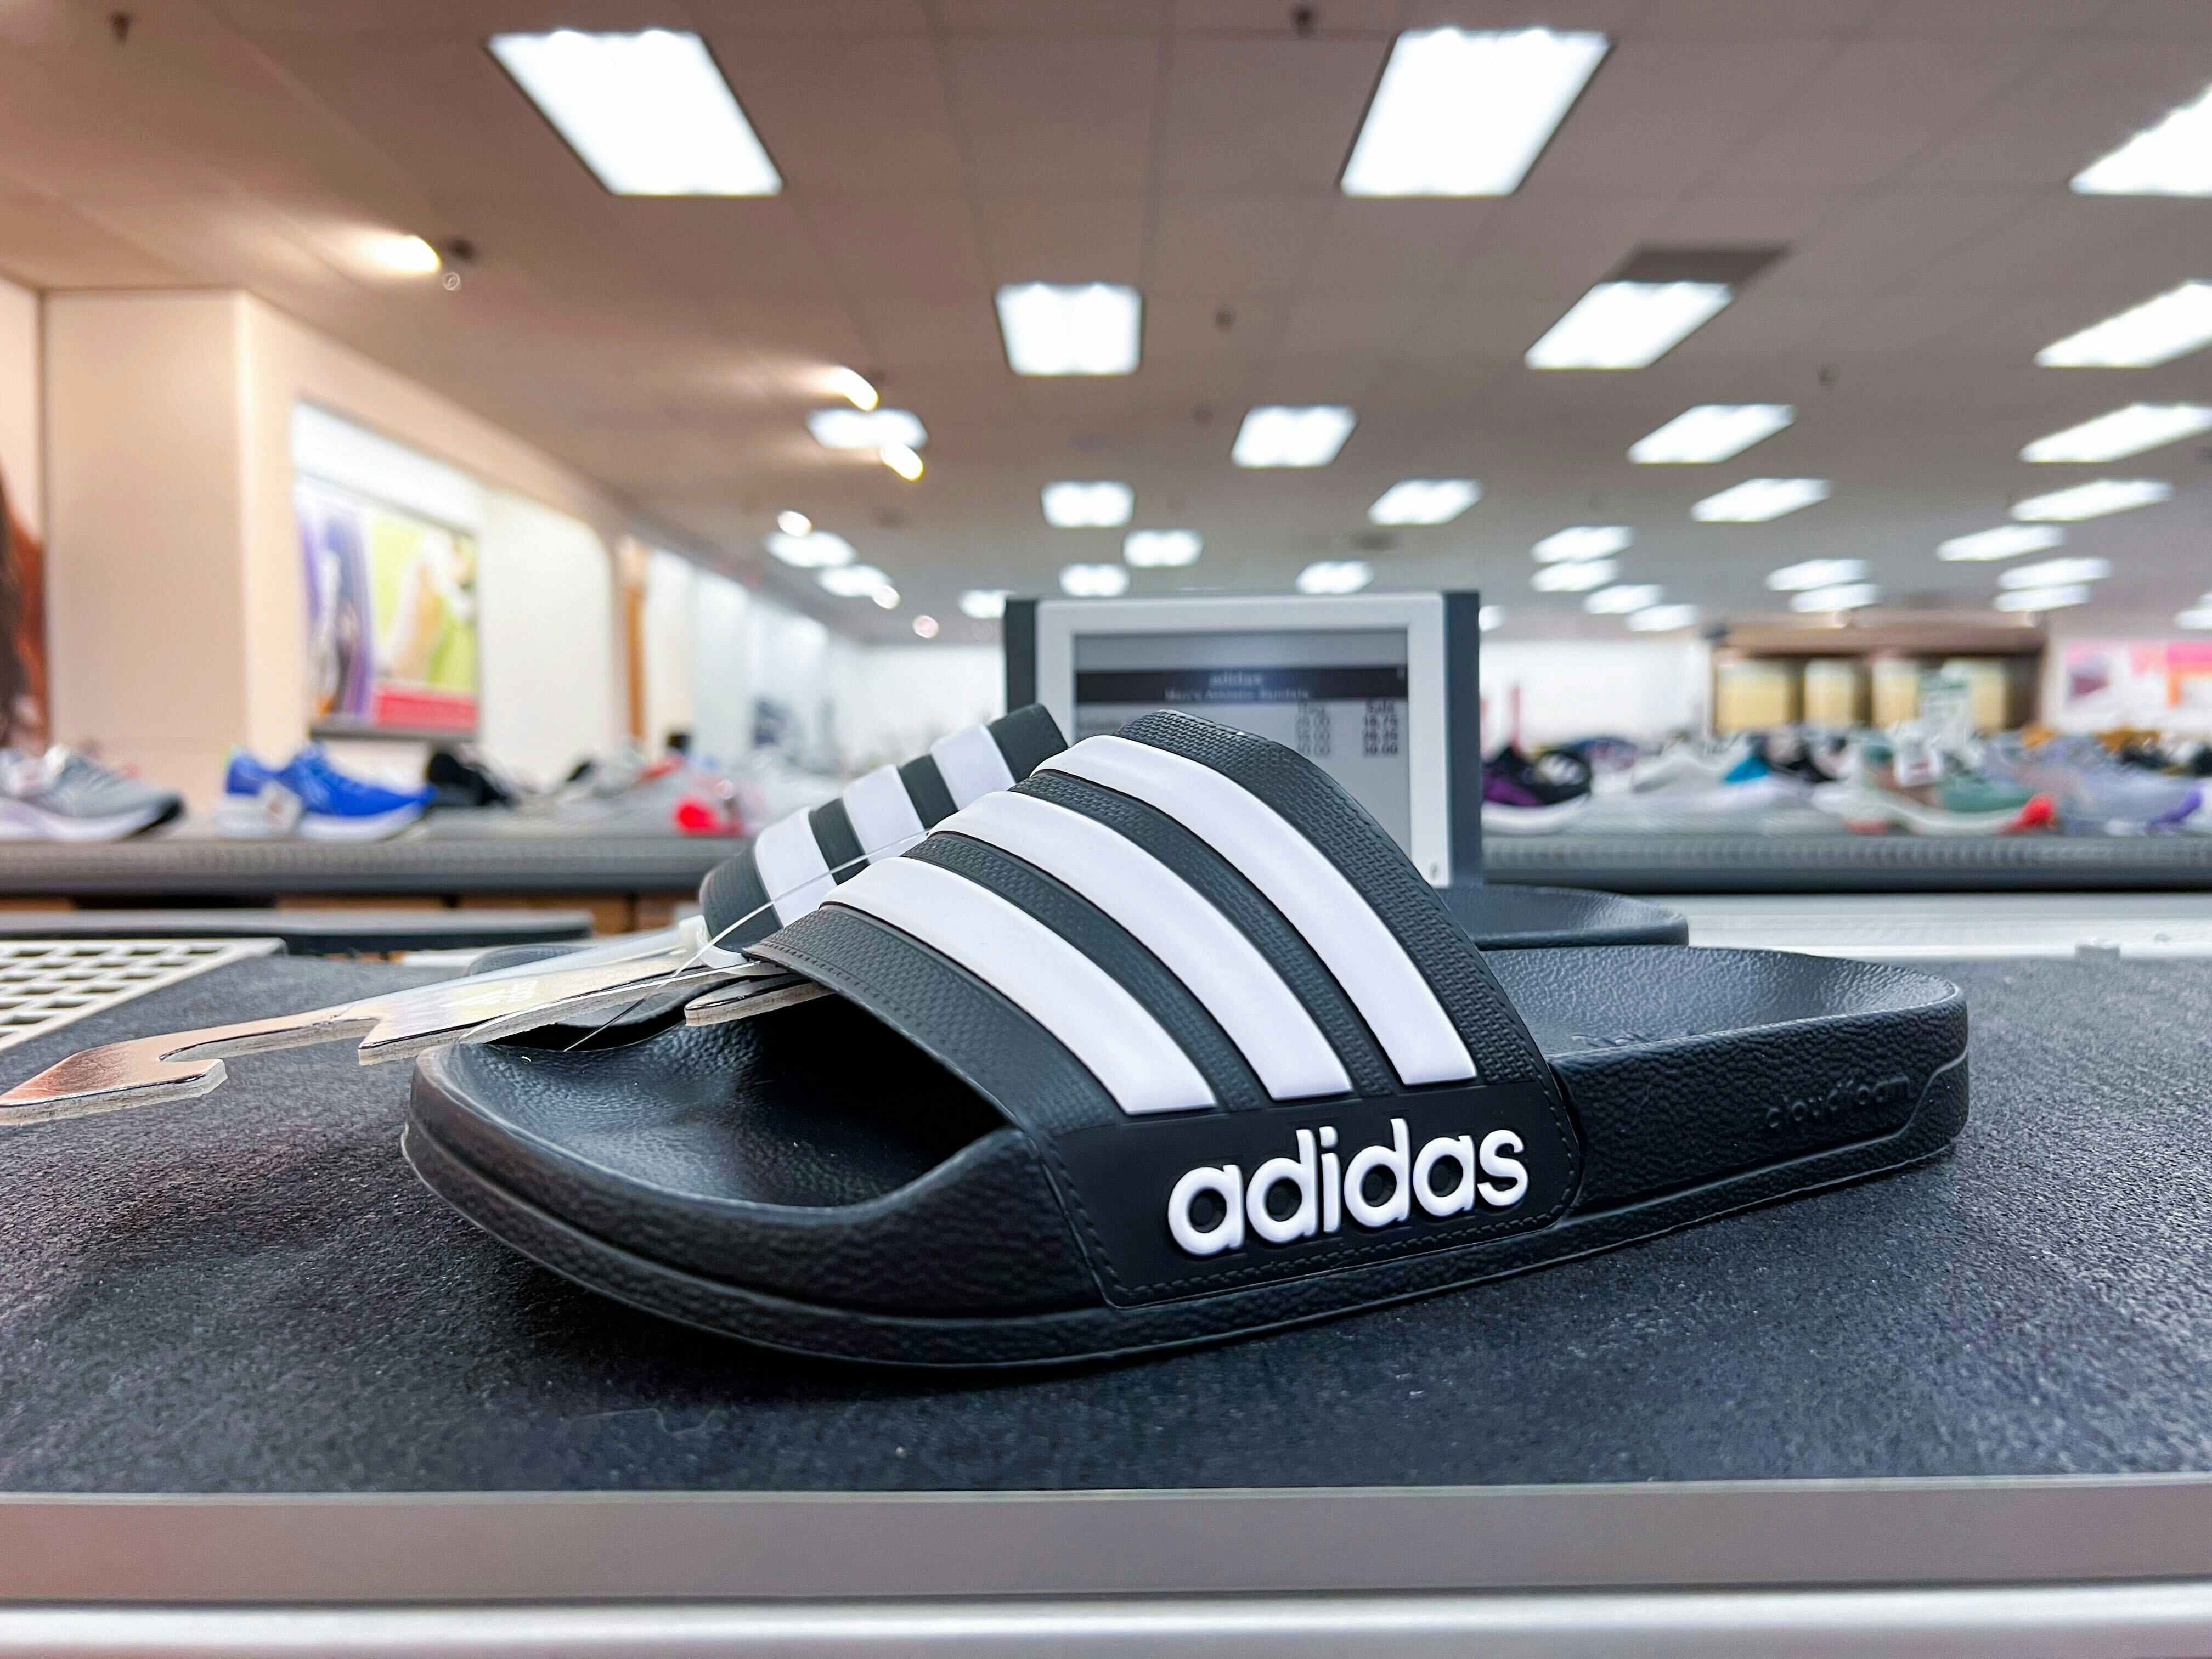 Adidas on Sale: $19 Hoodie, $22 Slides, and More at Shop Premium Outlets